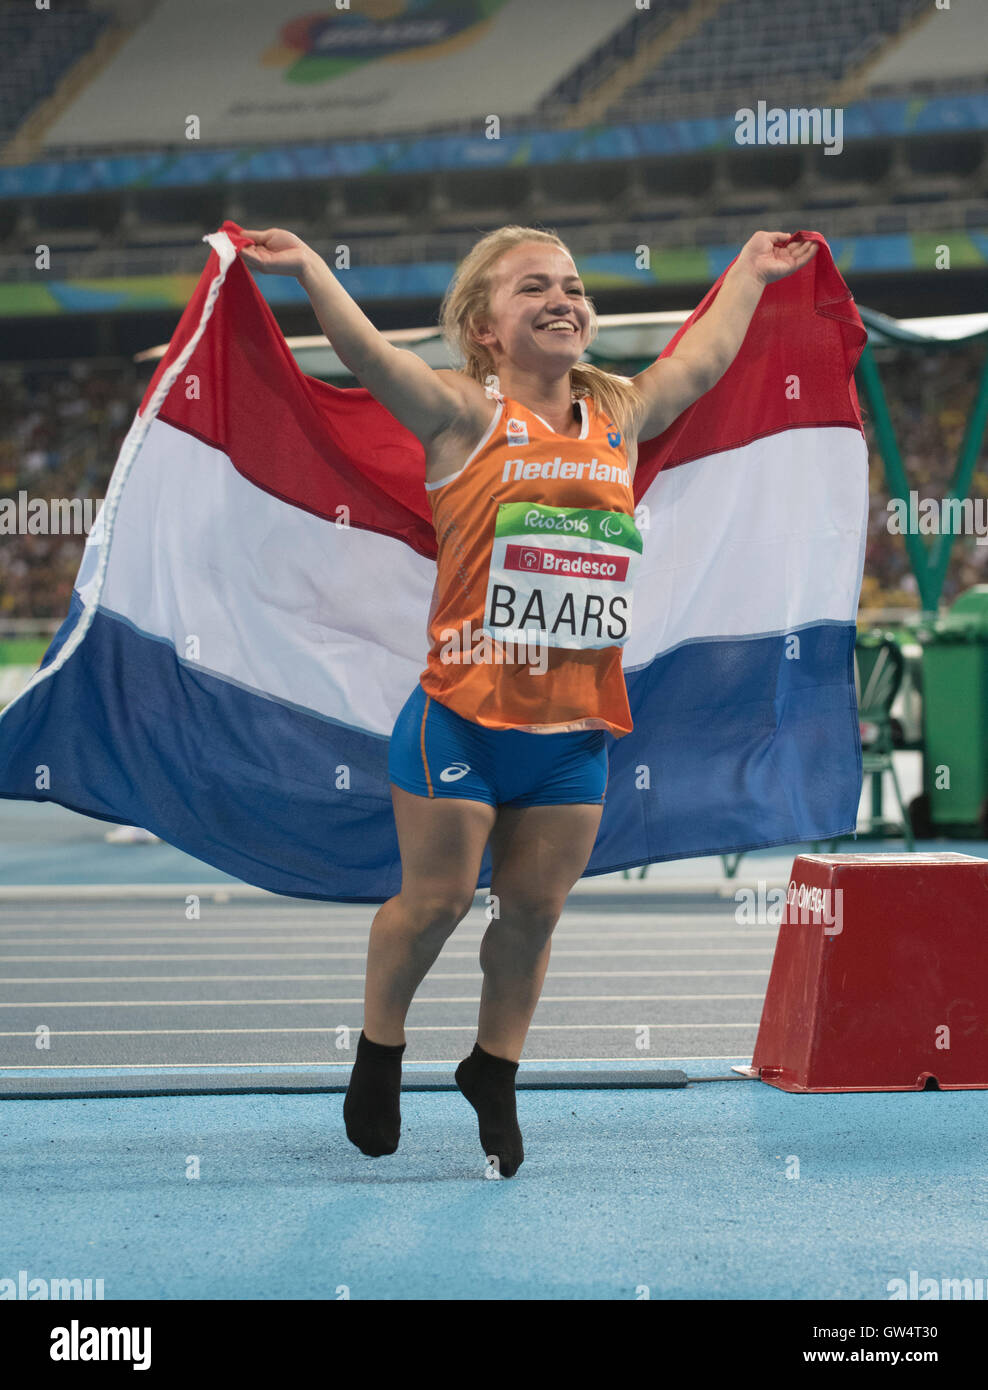 Rio De Janeiro, Brz. 11th Sep, 2016. Rio de Janeiro, Brazil 11SEP16: Lara Baars of the Netherlands jumps for joy after getting third in the women's F40 shot put final with a throw of 7.12 meters on the fourth day of athletics competition at the 2016 Rio Paralympic Games. Credit:  Bob Daemmrich/Alamy Live News Stock Photo